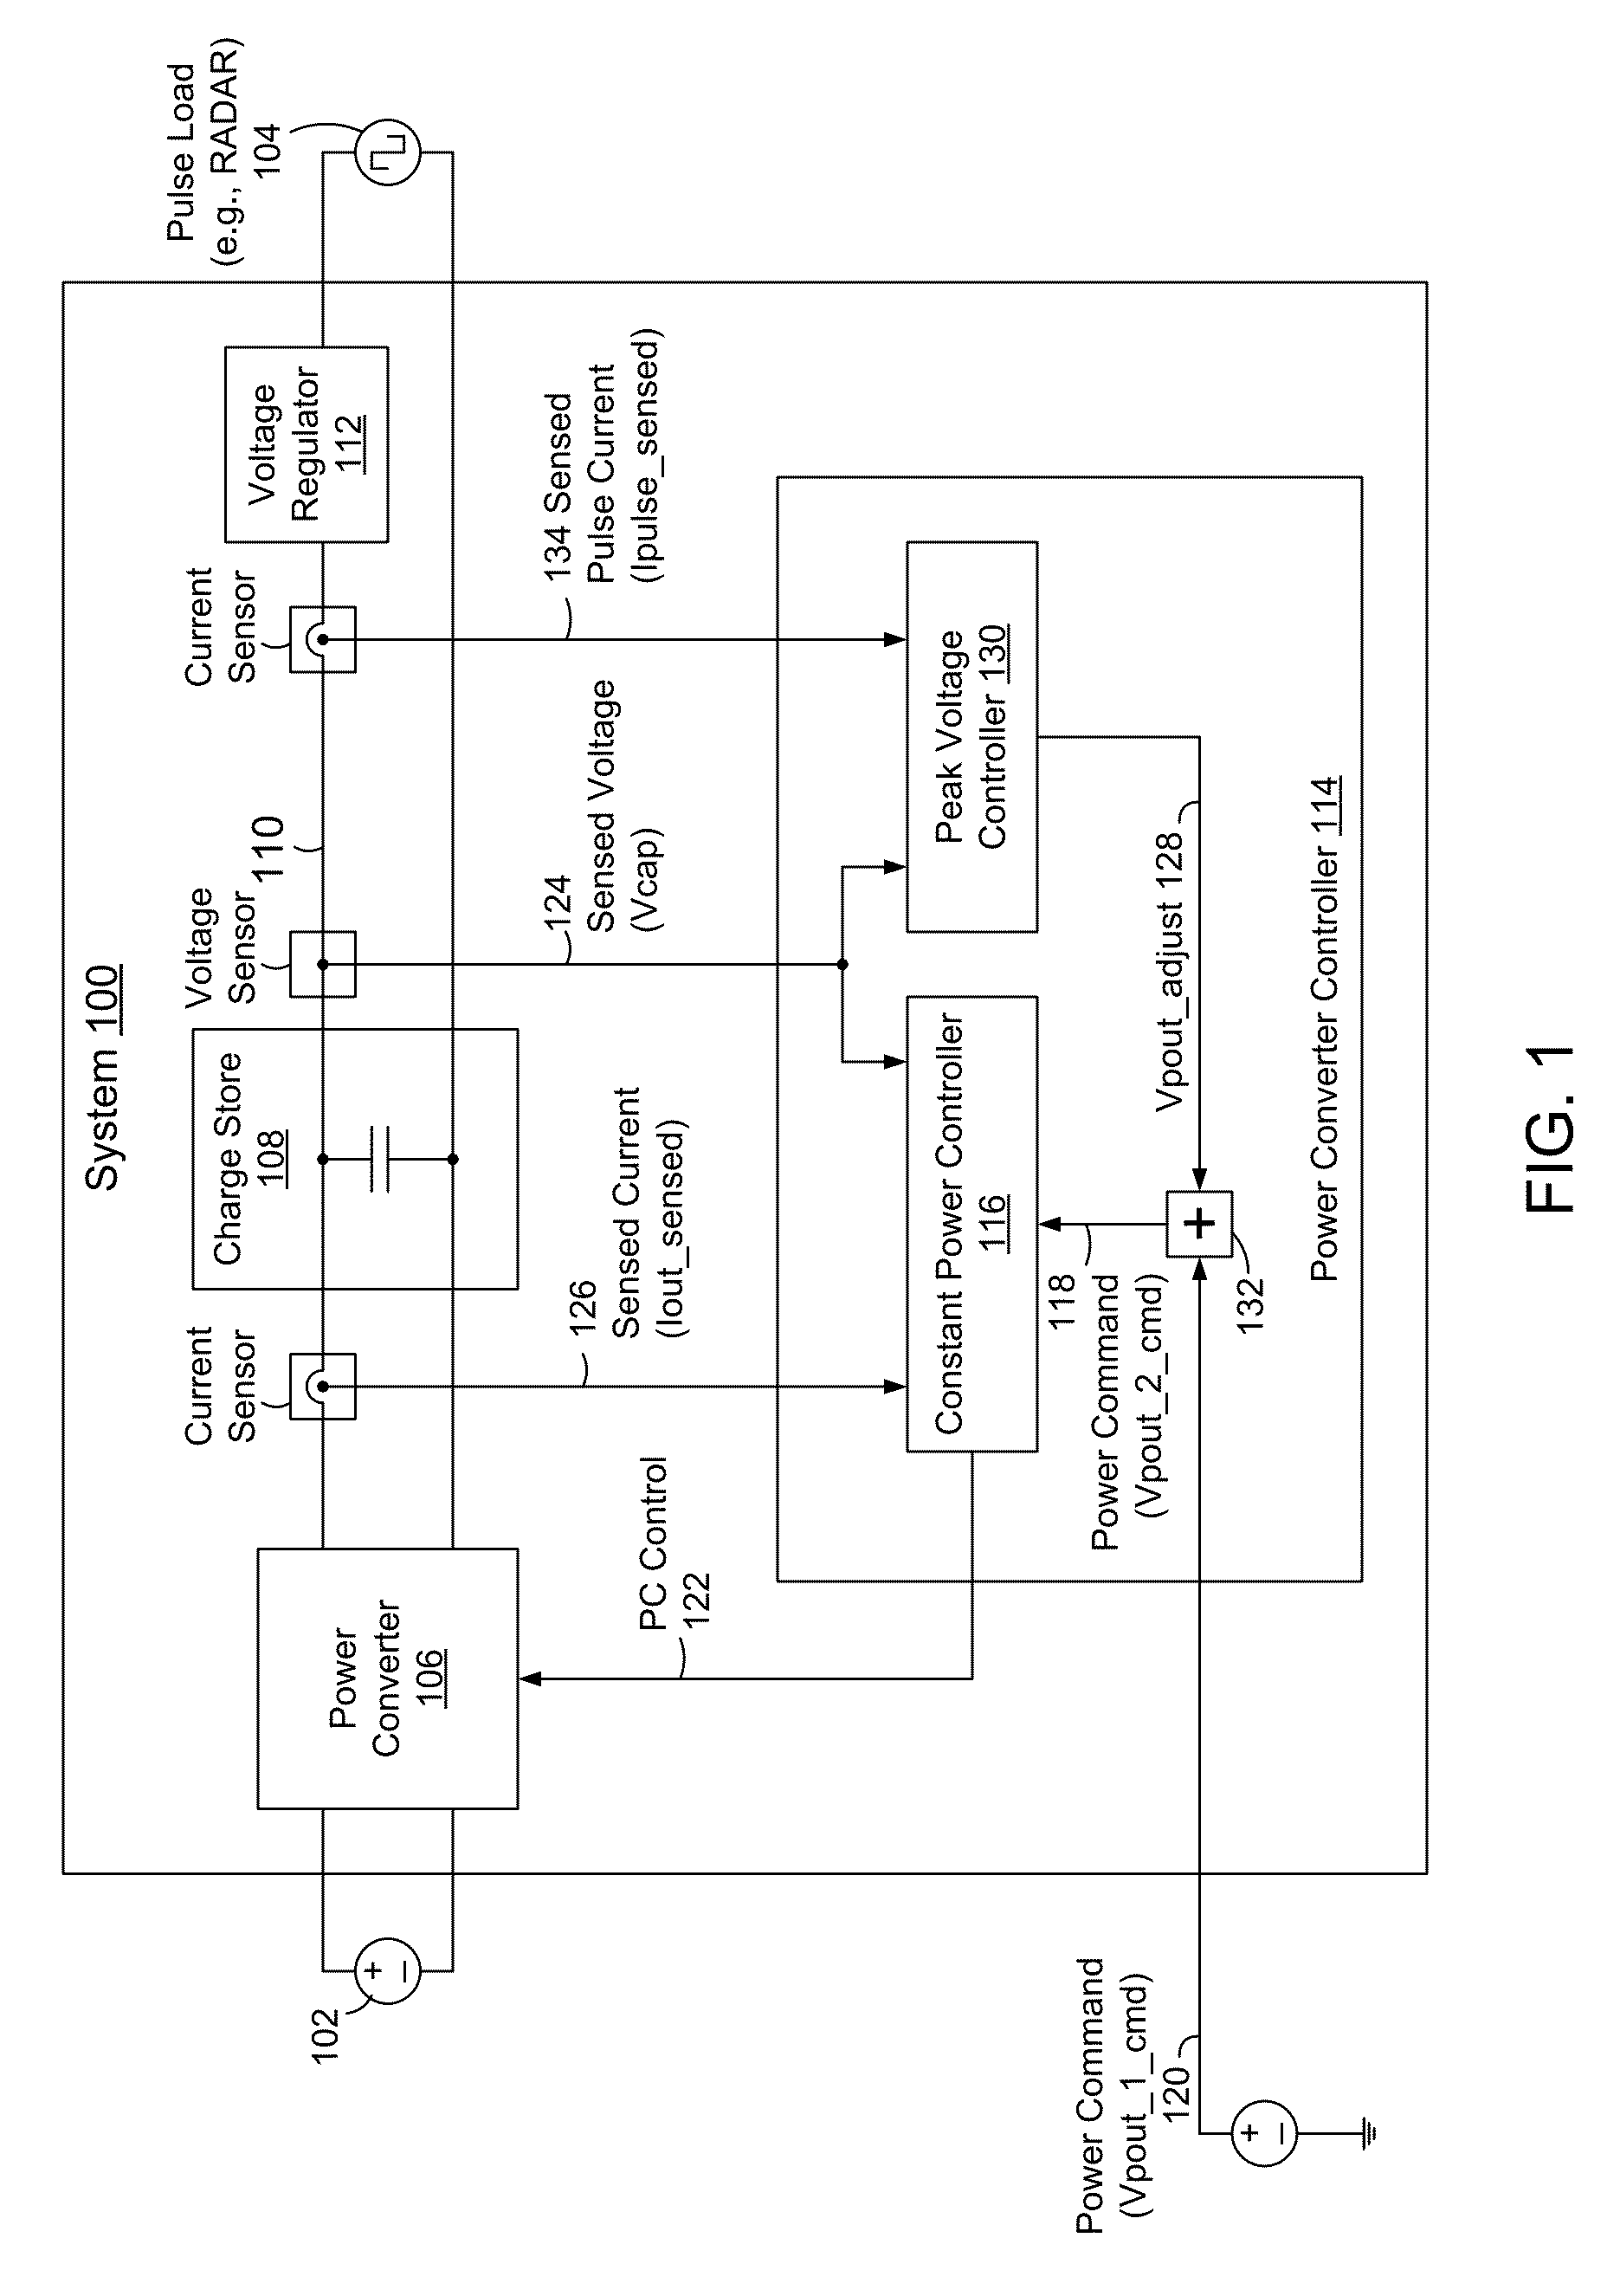 Methods and systems to convert a pulse power demand to a constant power draw